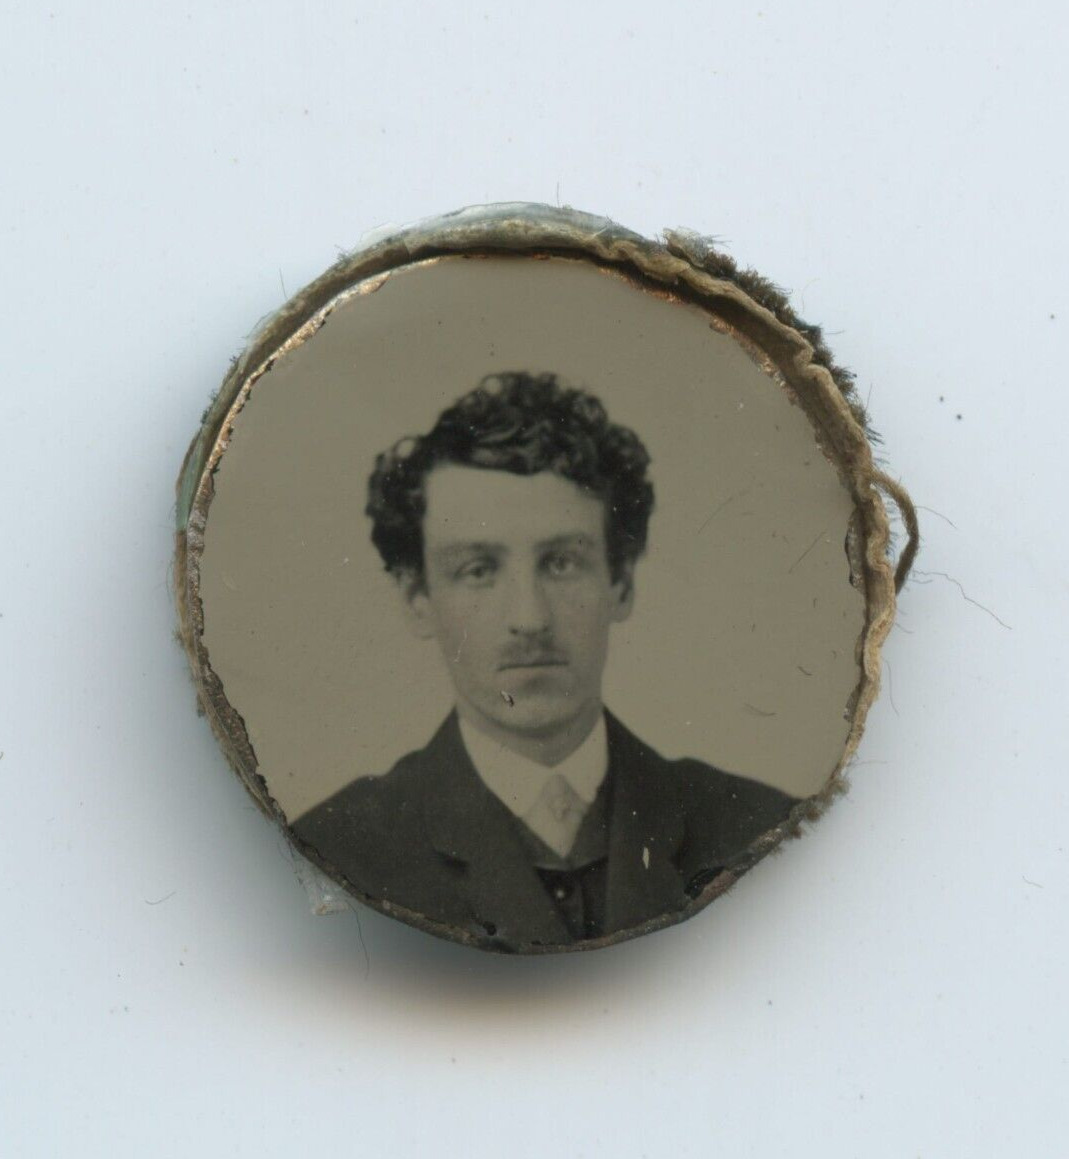 Mini Tintype Mourning Button or Jewelry with Black Striped Fabric on Reverse